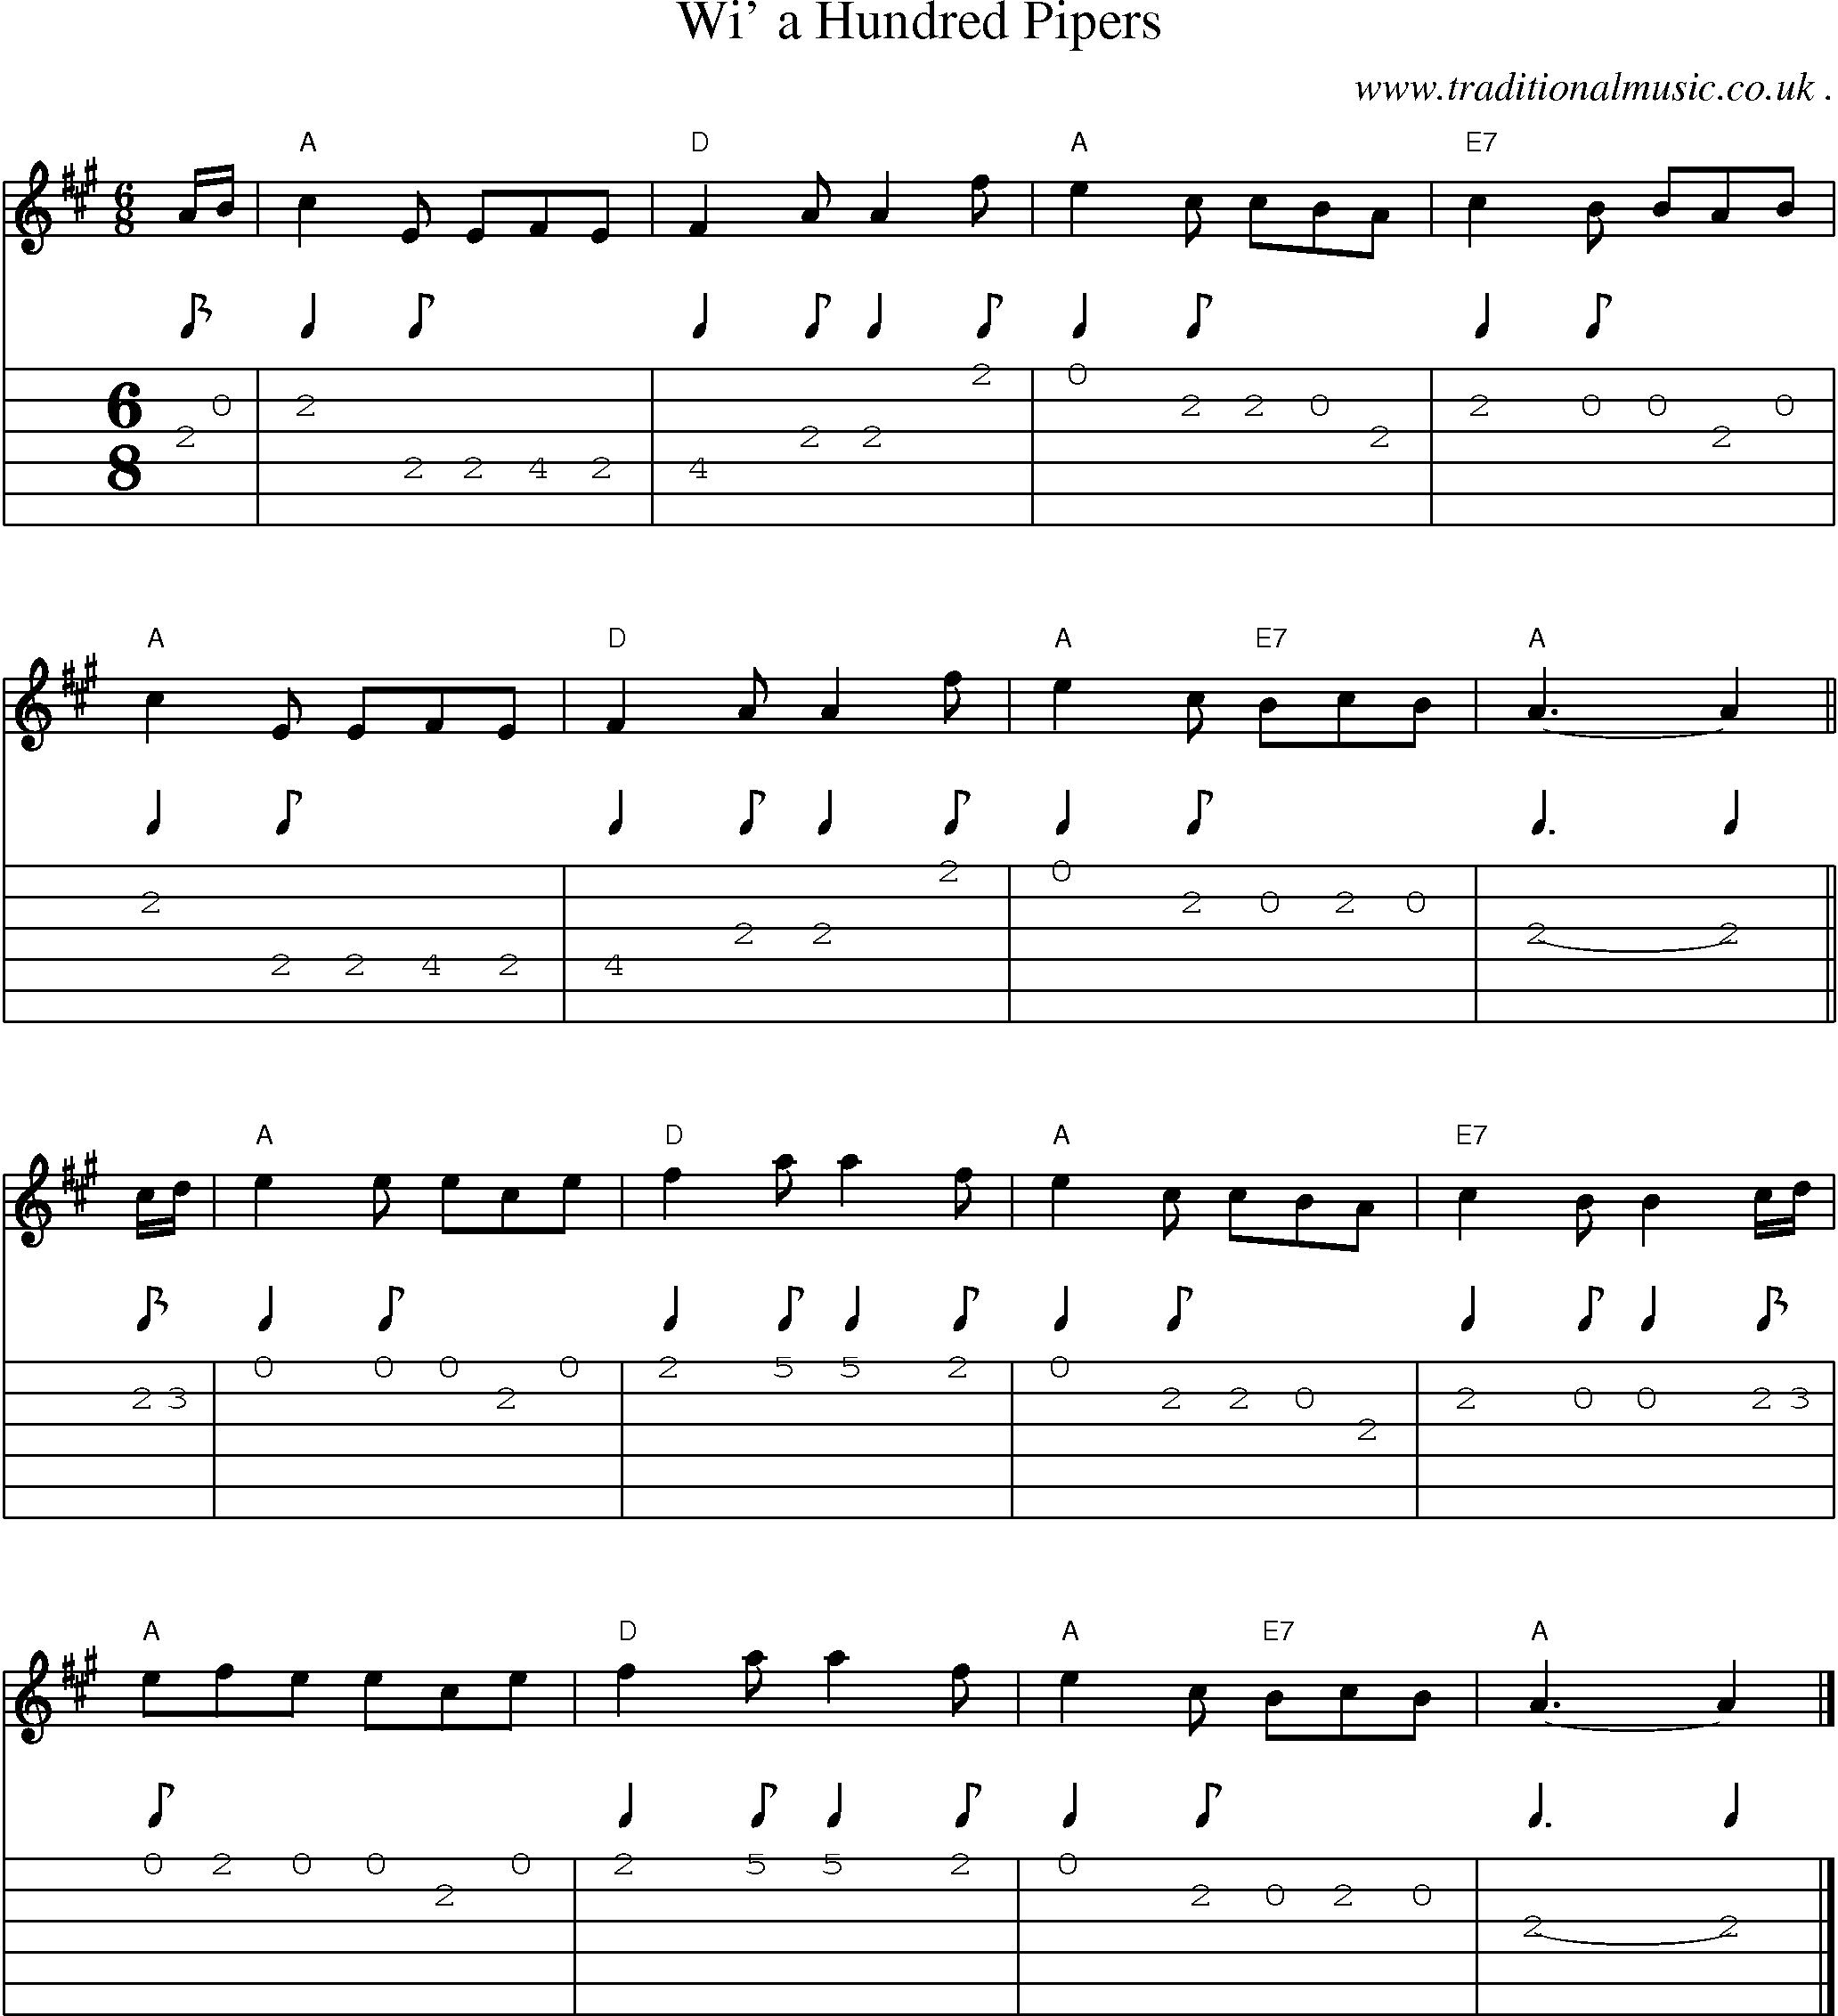 Music Score and Guitar Tabs for Wi a Hundred Pipers